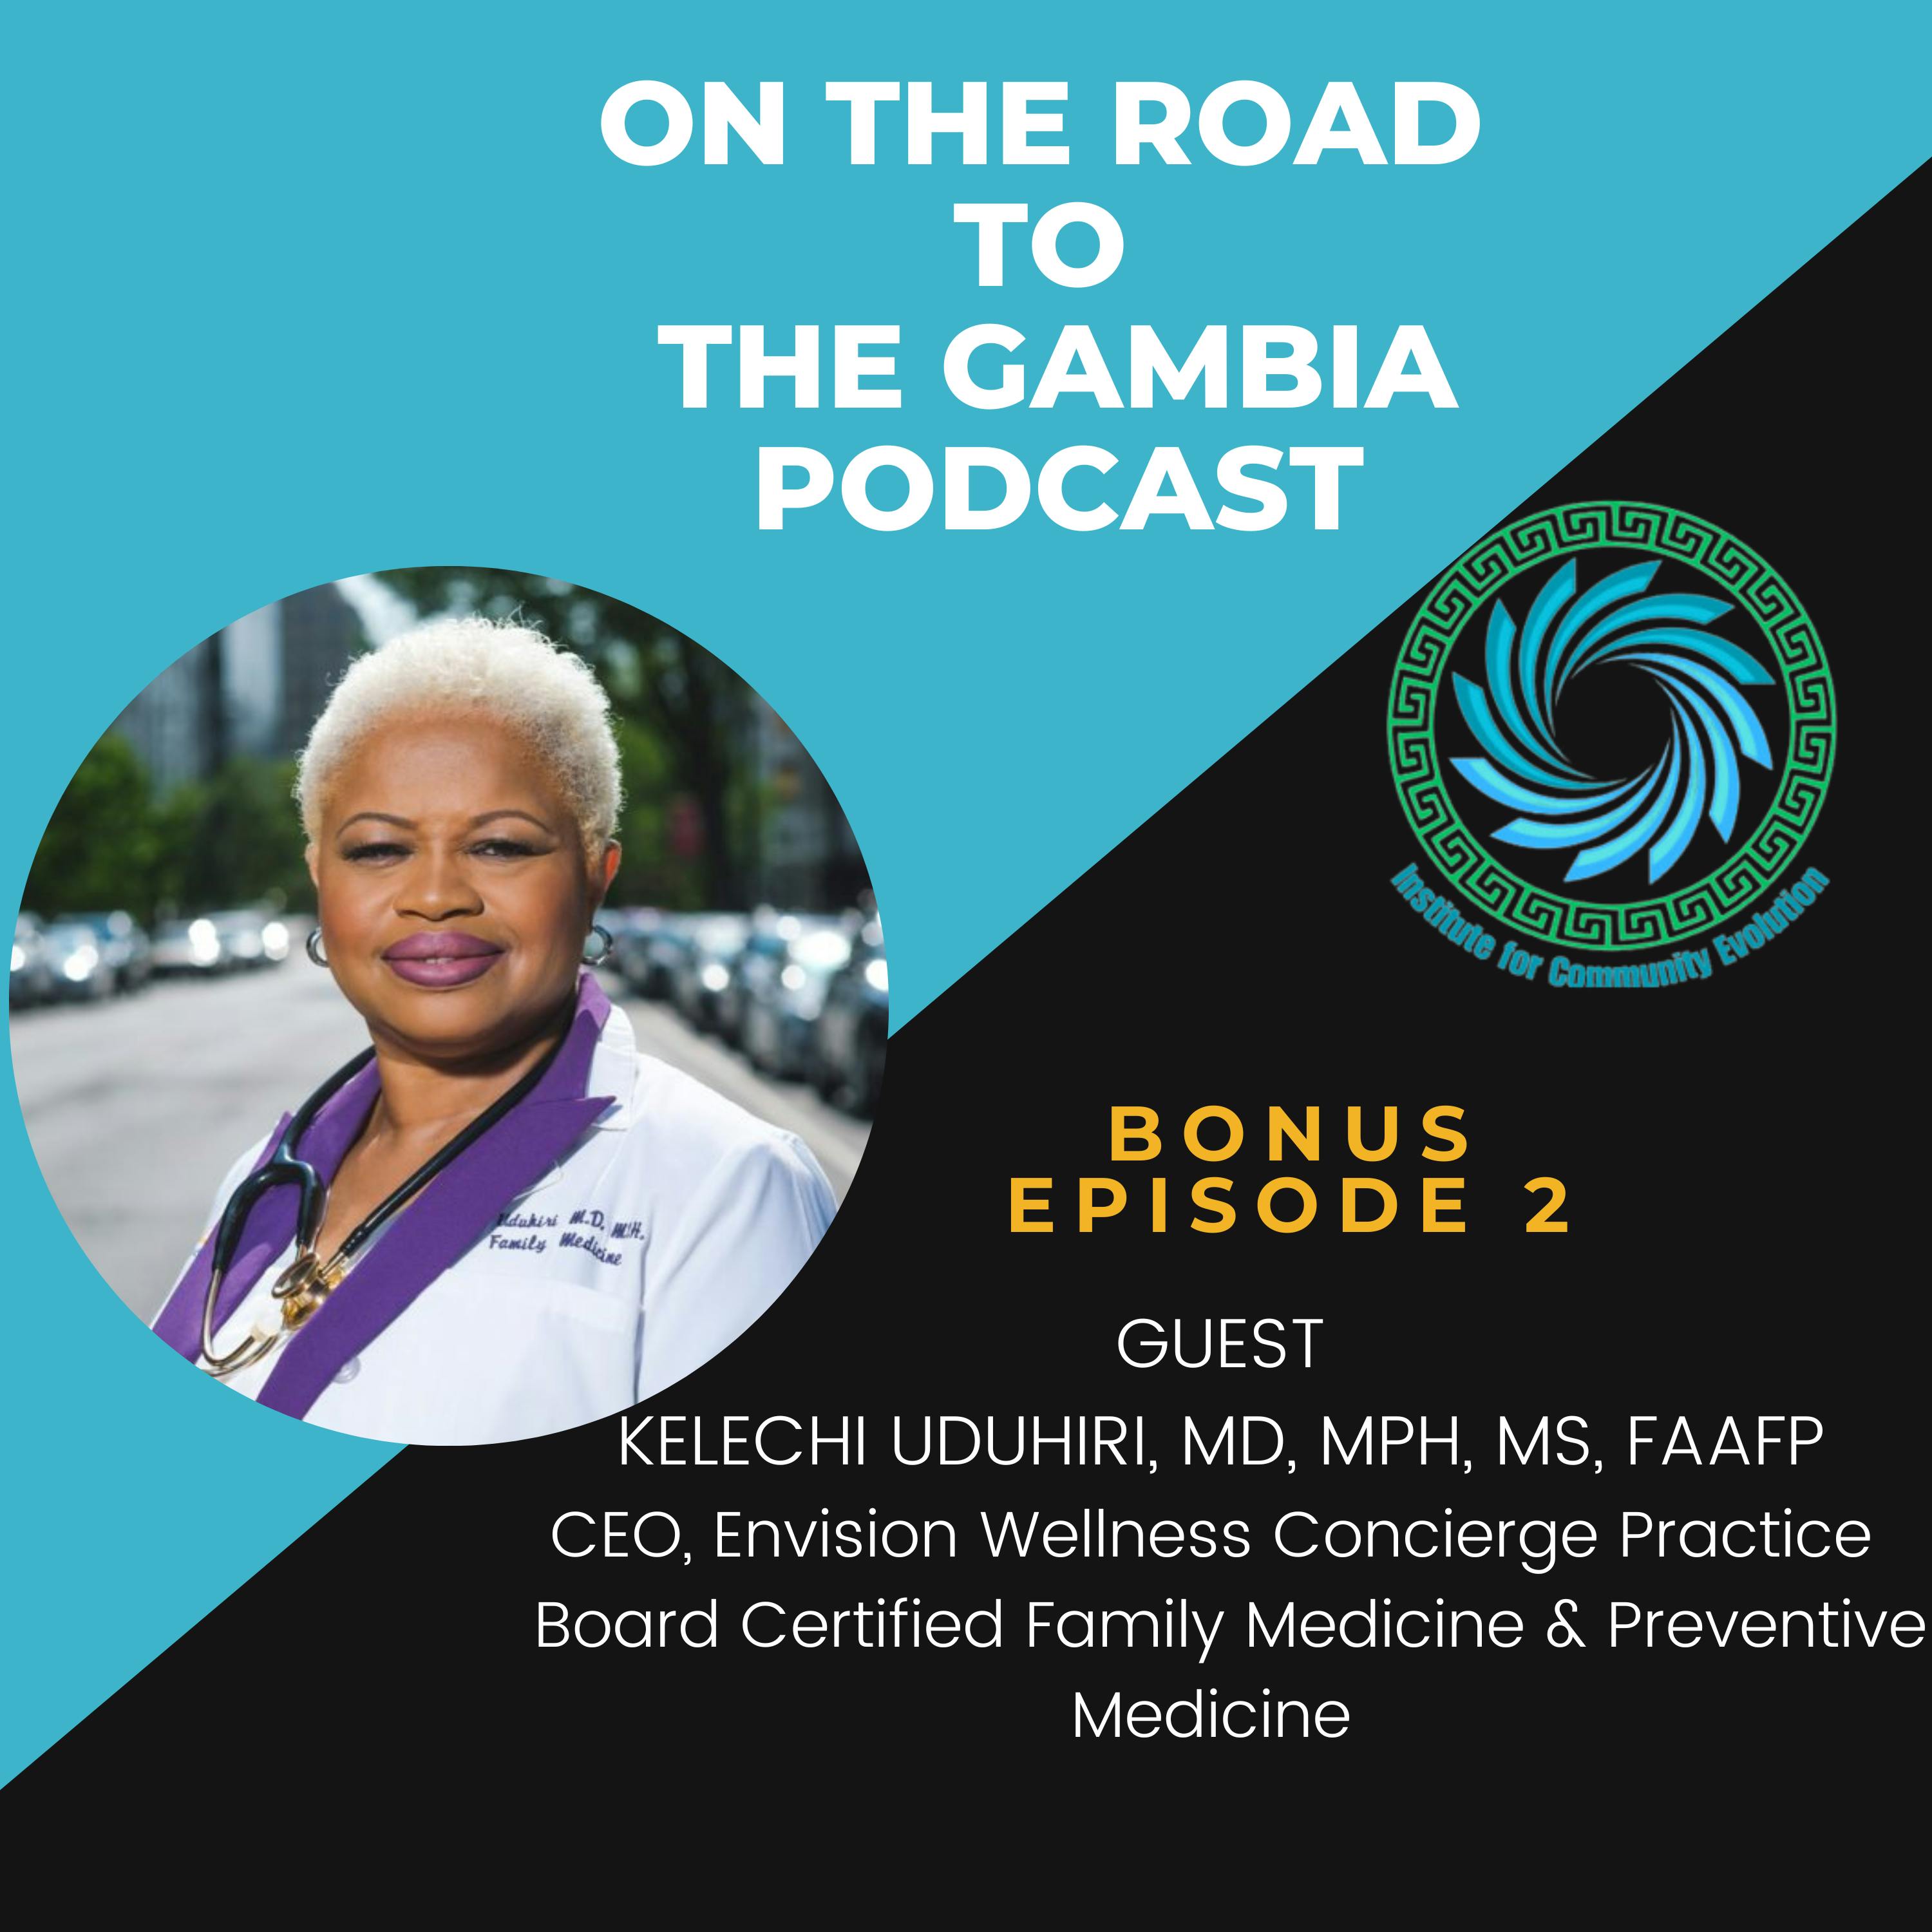 Embracing the Role of a Healer: Dr. Kelechi’s Journey To Serve The Gambia